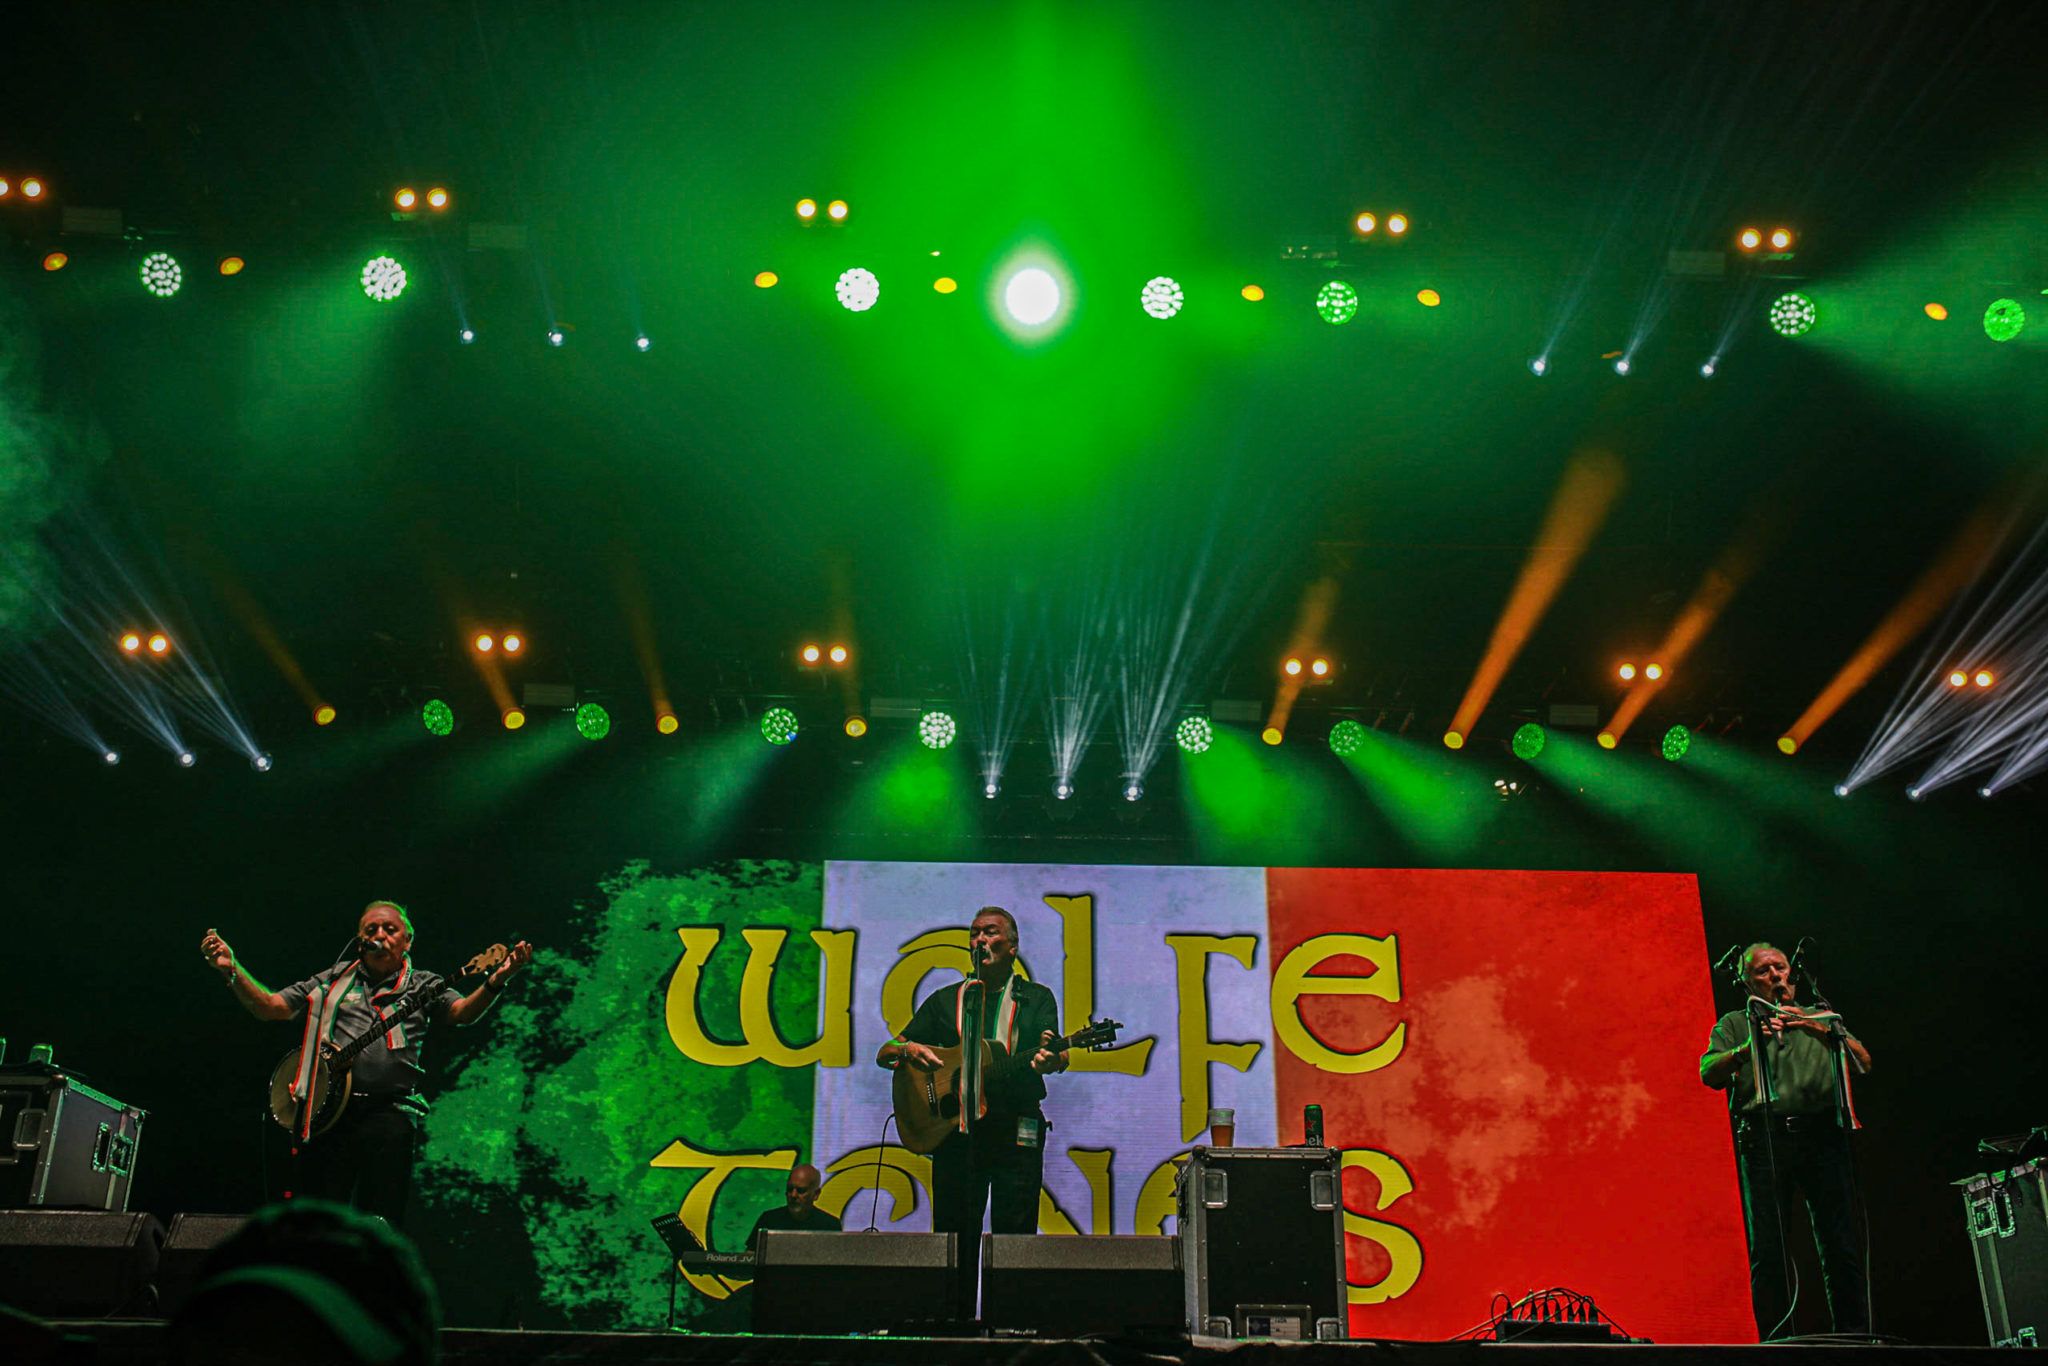 Wolfe Tones reveal interest in representing Ireland at Eurovision